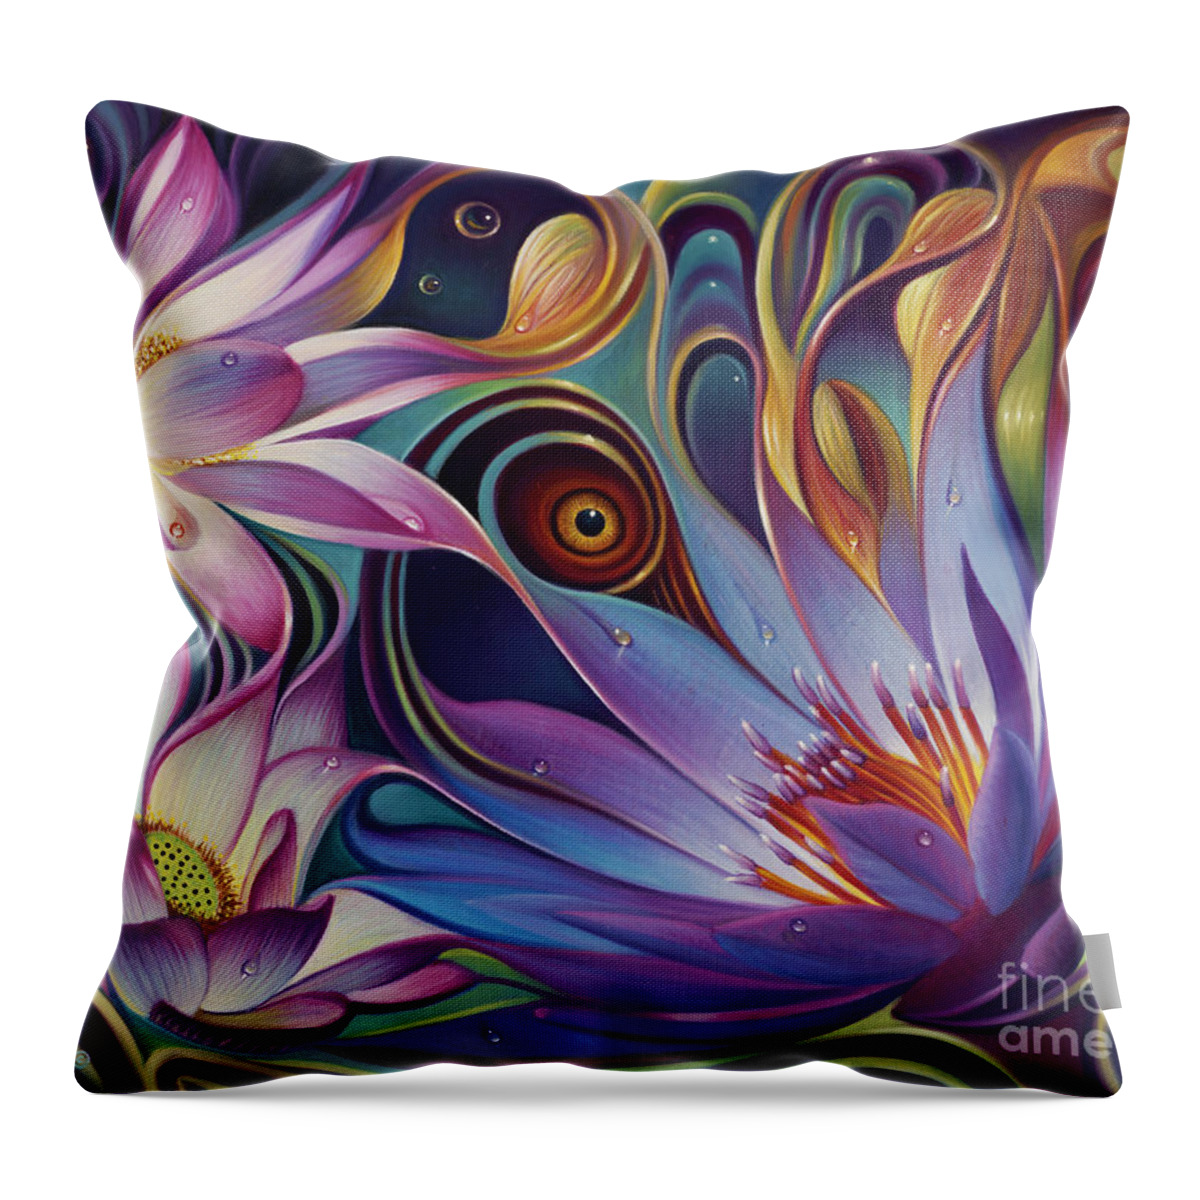 Lotus Throw Pillow featuring the painting Dynamic Floral Fantasy by Ricardo Chavez-Mendez